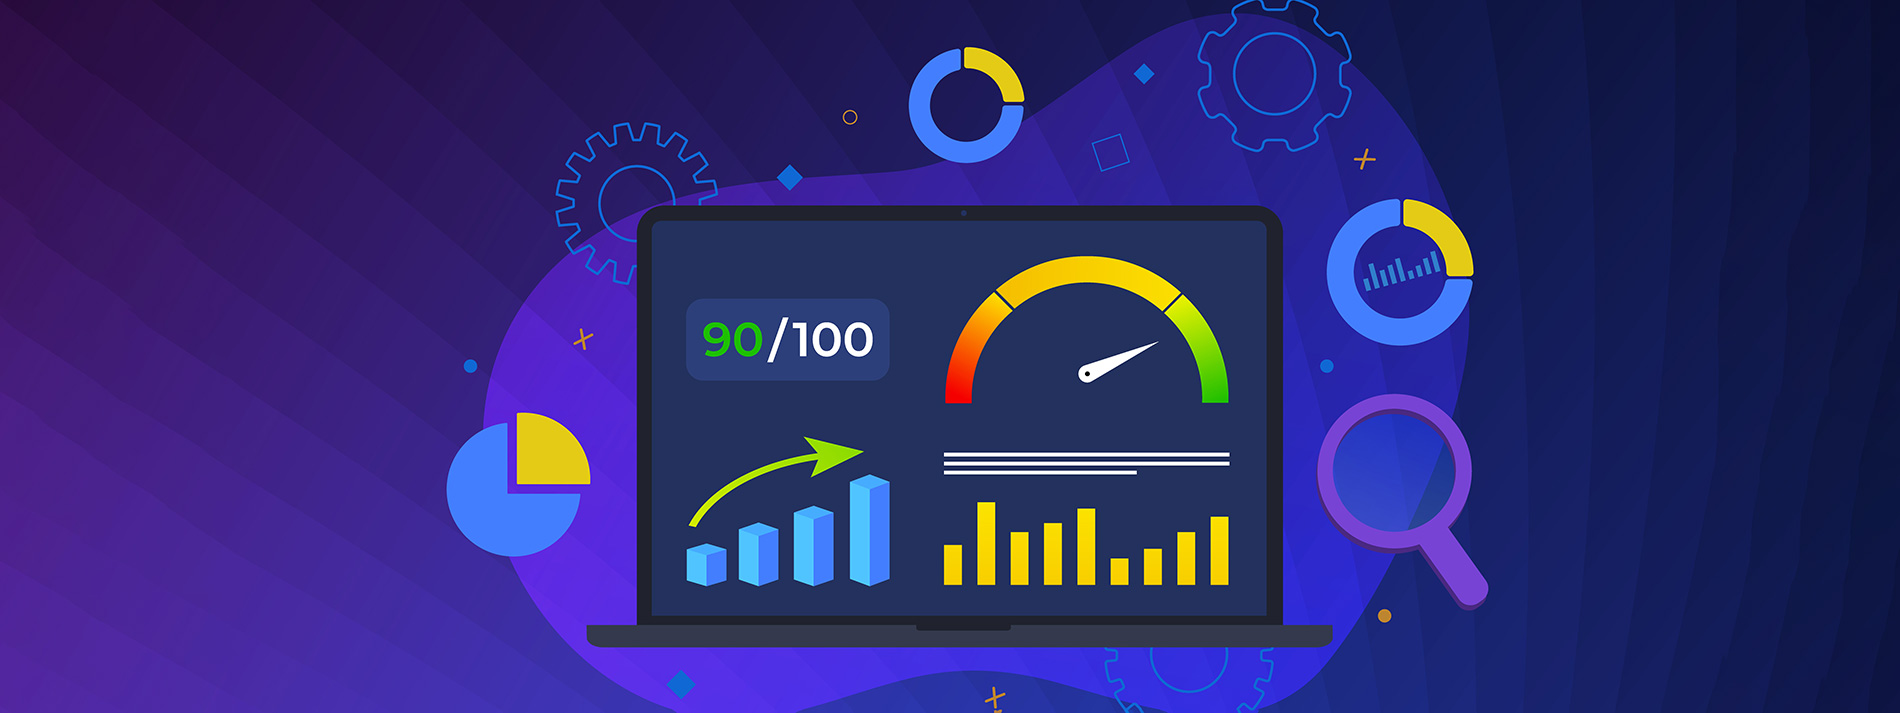 How to Start With Your Application's Performance Optimization